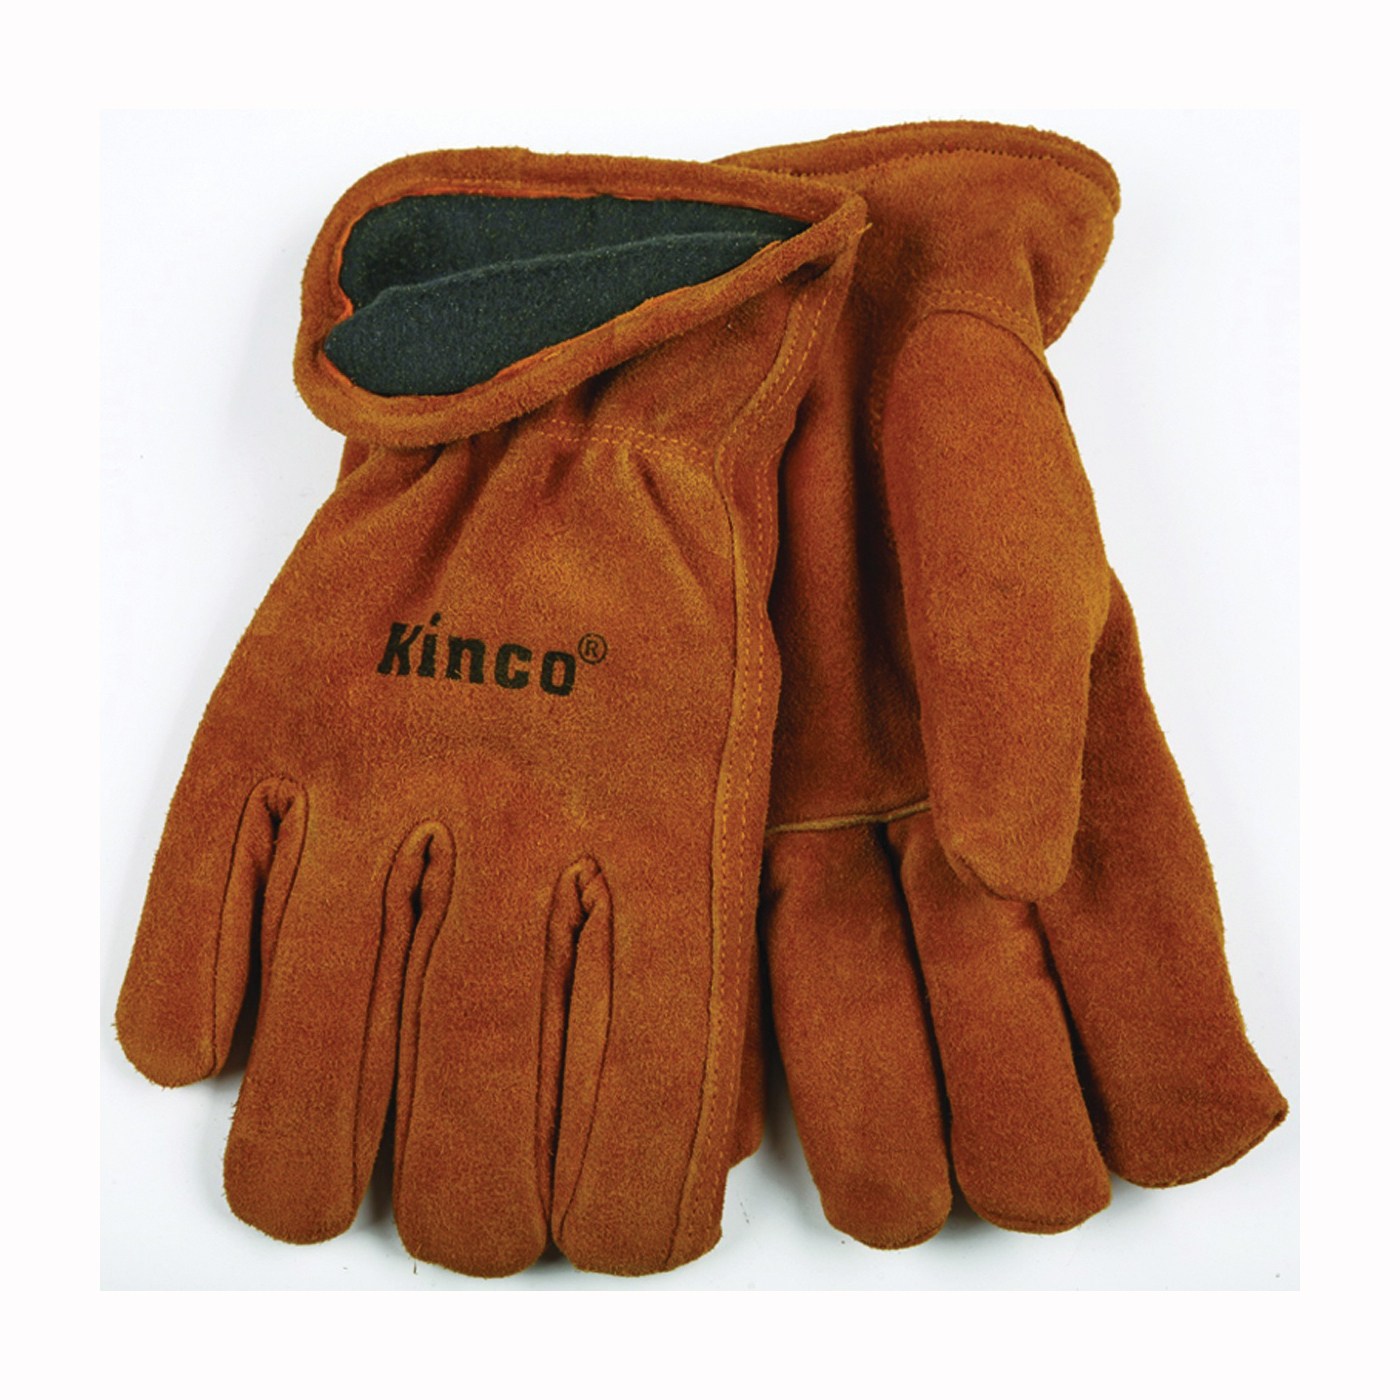 50RL-L High-Durability Driver Gloves, Men's, L, 5 in L, Keystone Thumb, Easy-On Cuff, Cowhide Leather, Brown